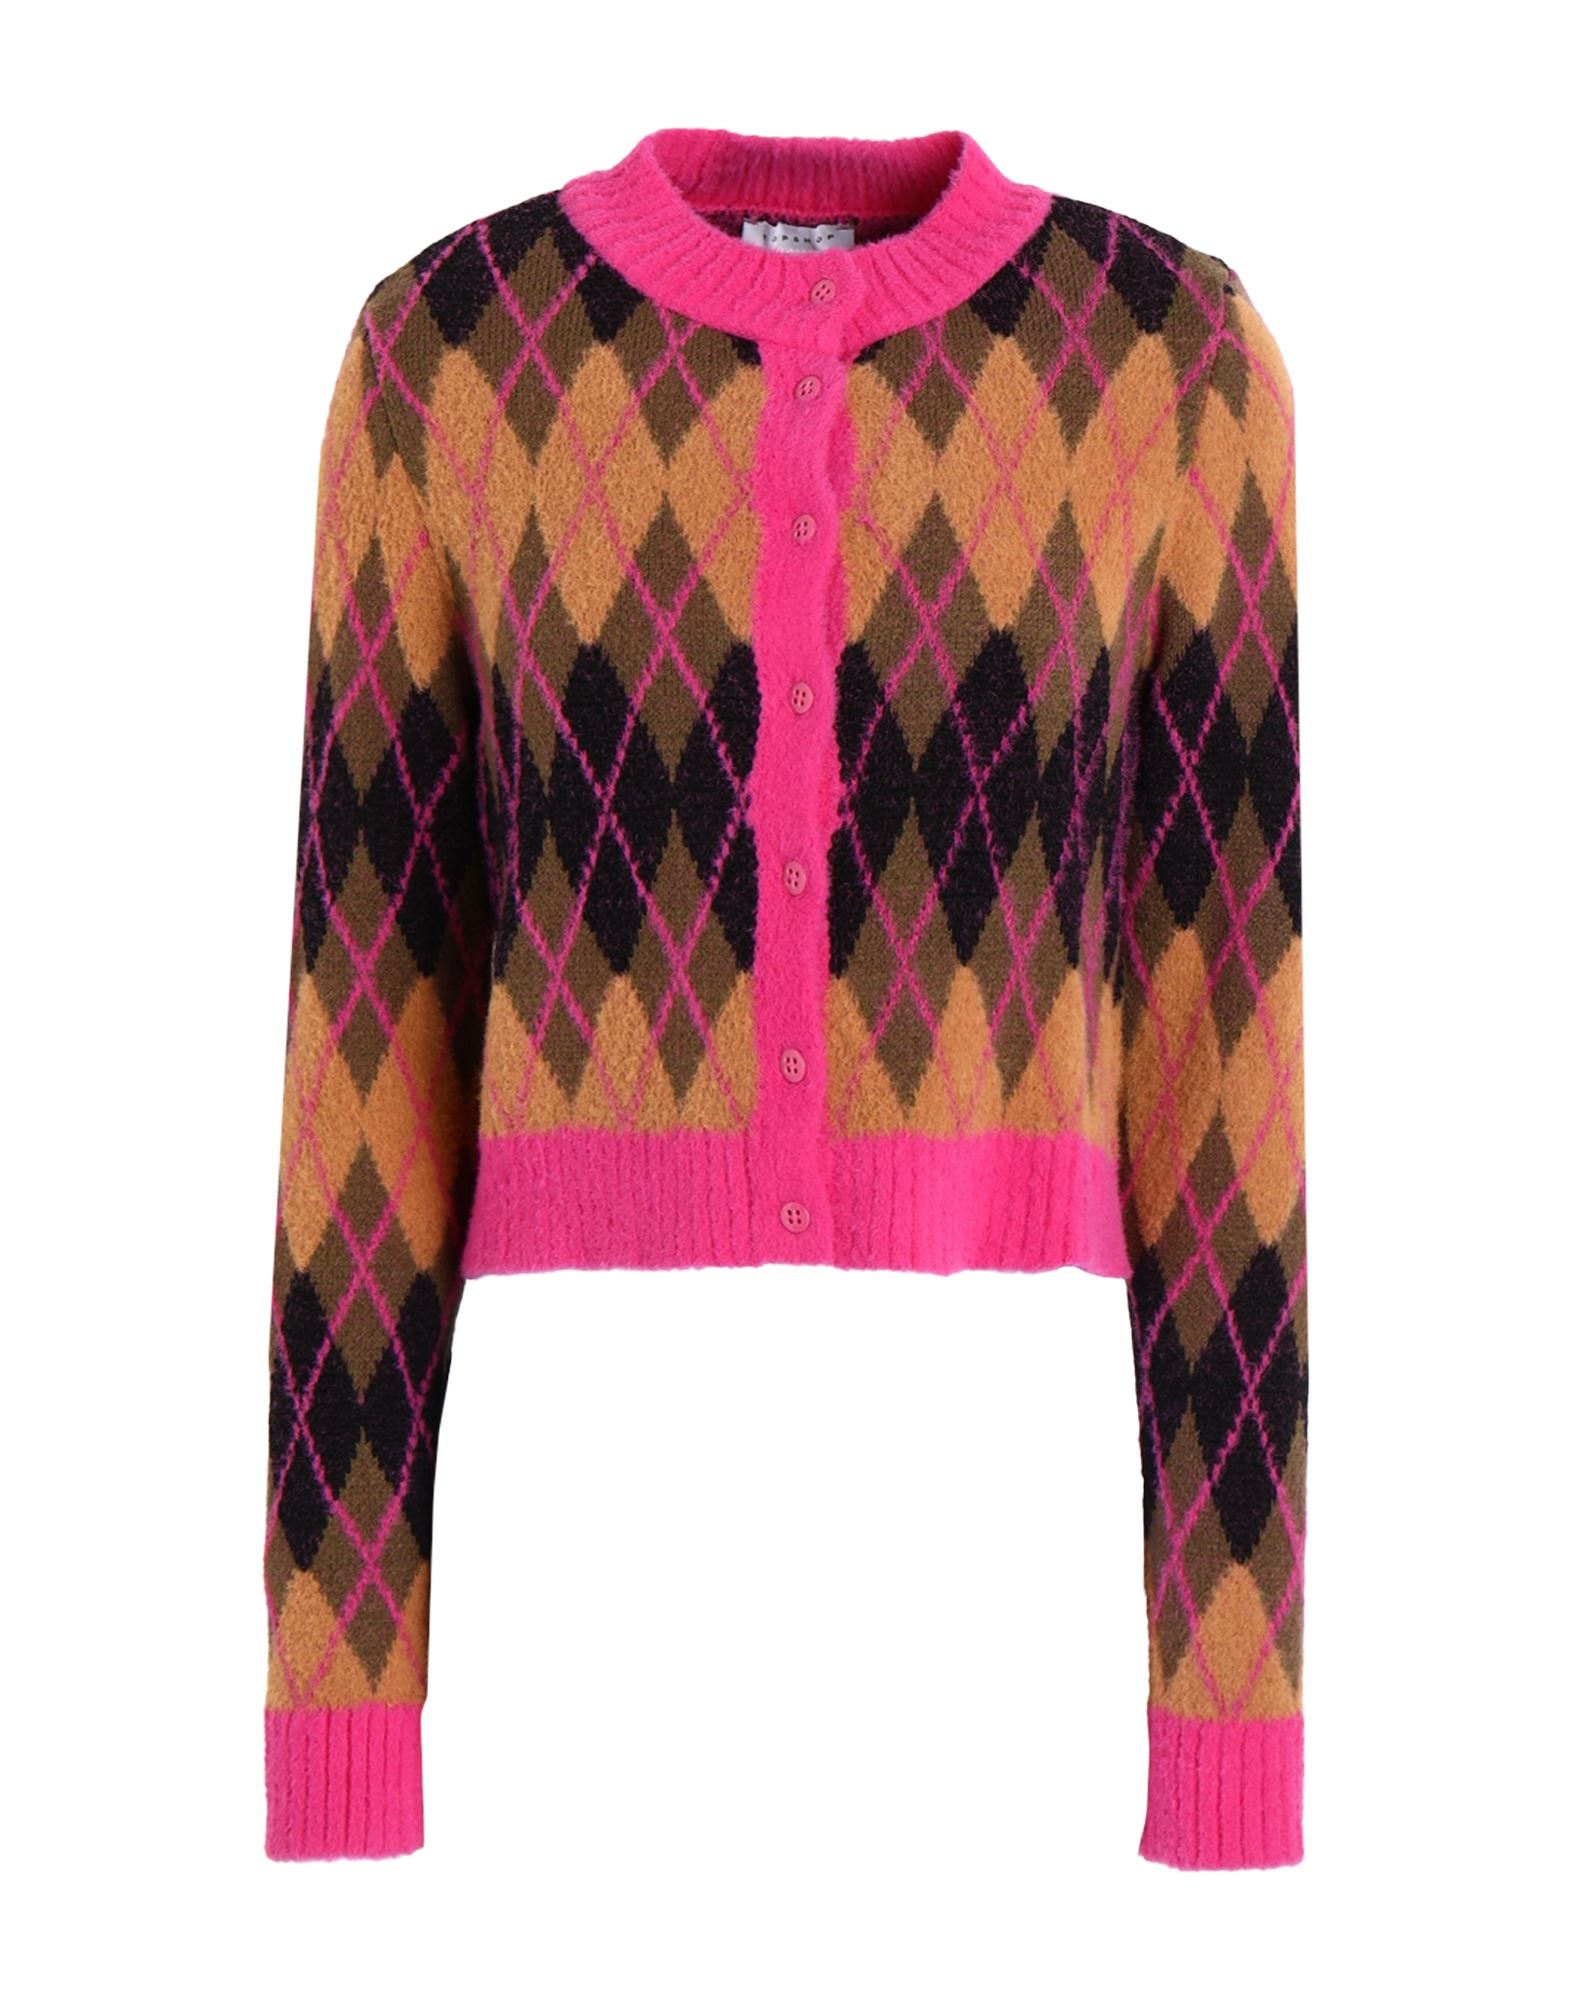 Topshop Knitted Bright Argyle Crop Cardi In Multi In Brown Multi